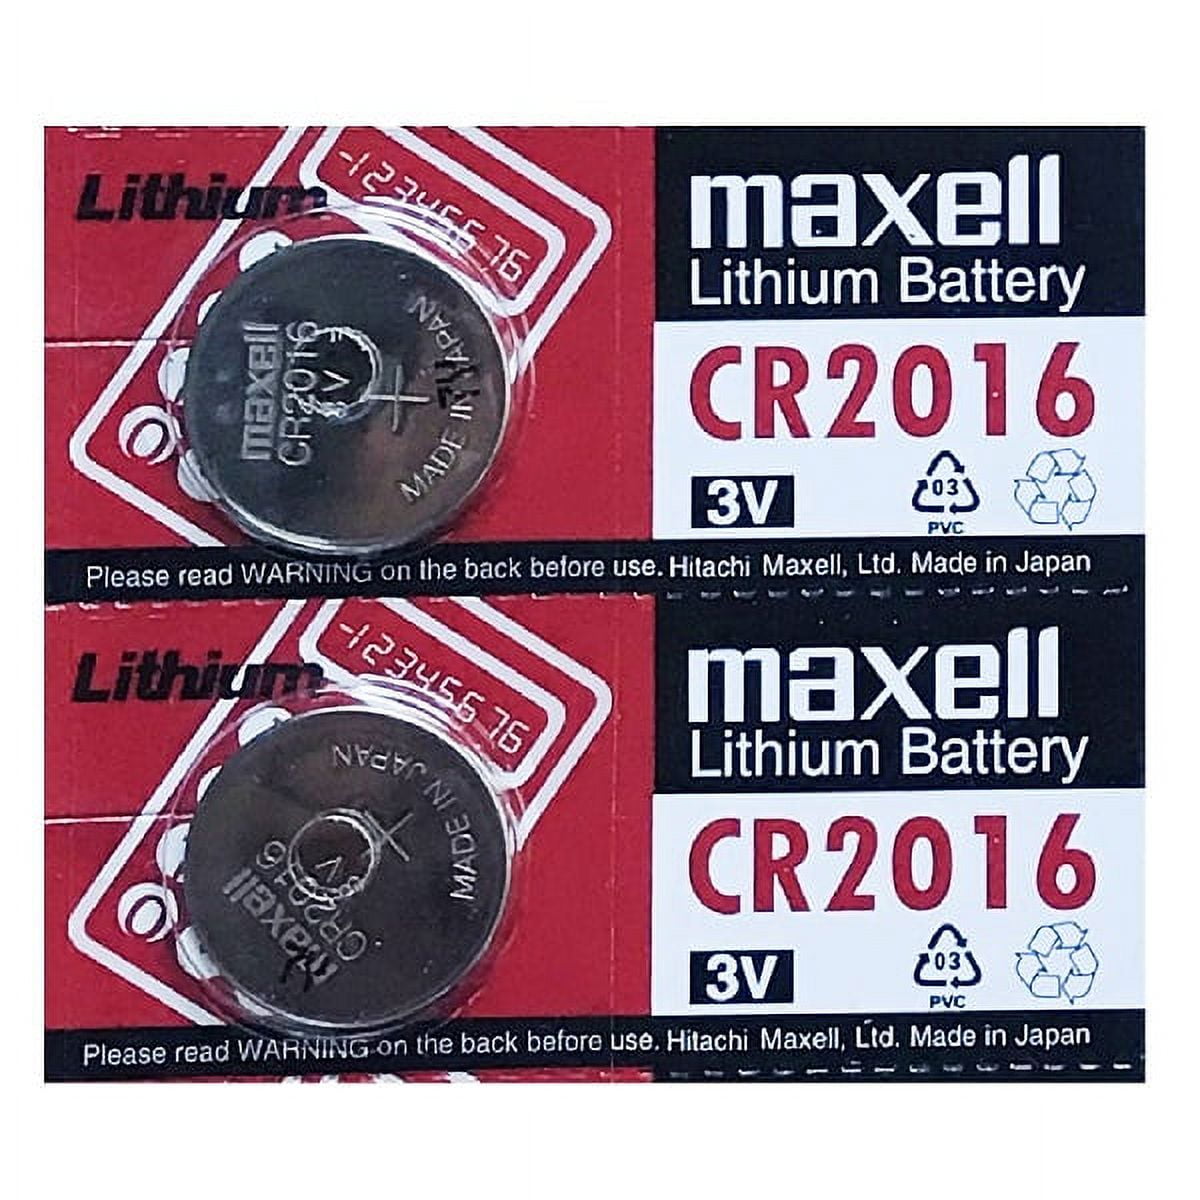 5pc Maxell 3V Lithium Coin Cell Battery CR1620 Replaces DL1620, BR1620